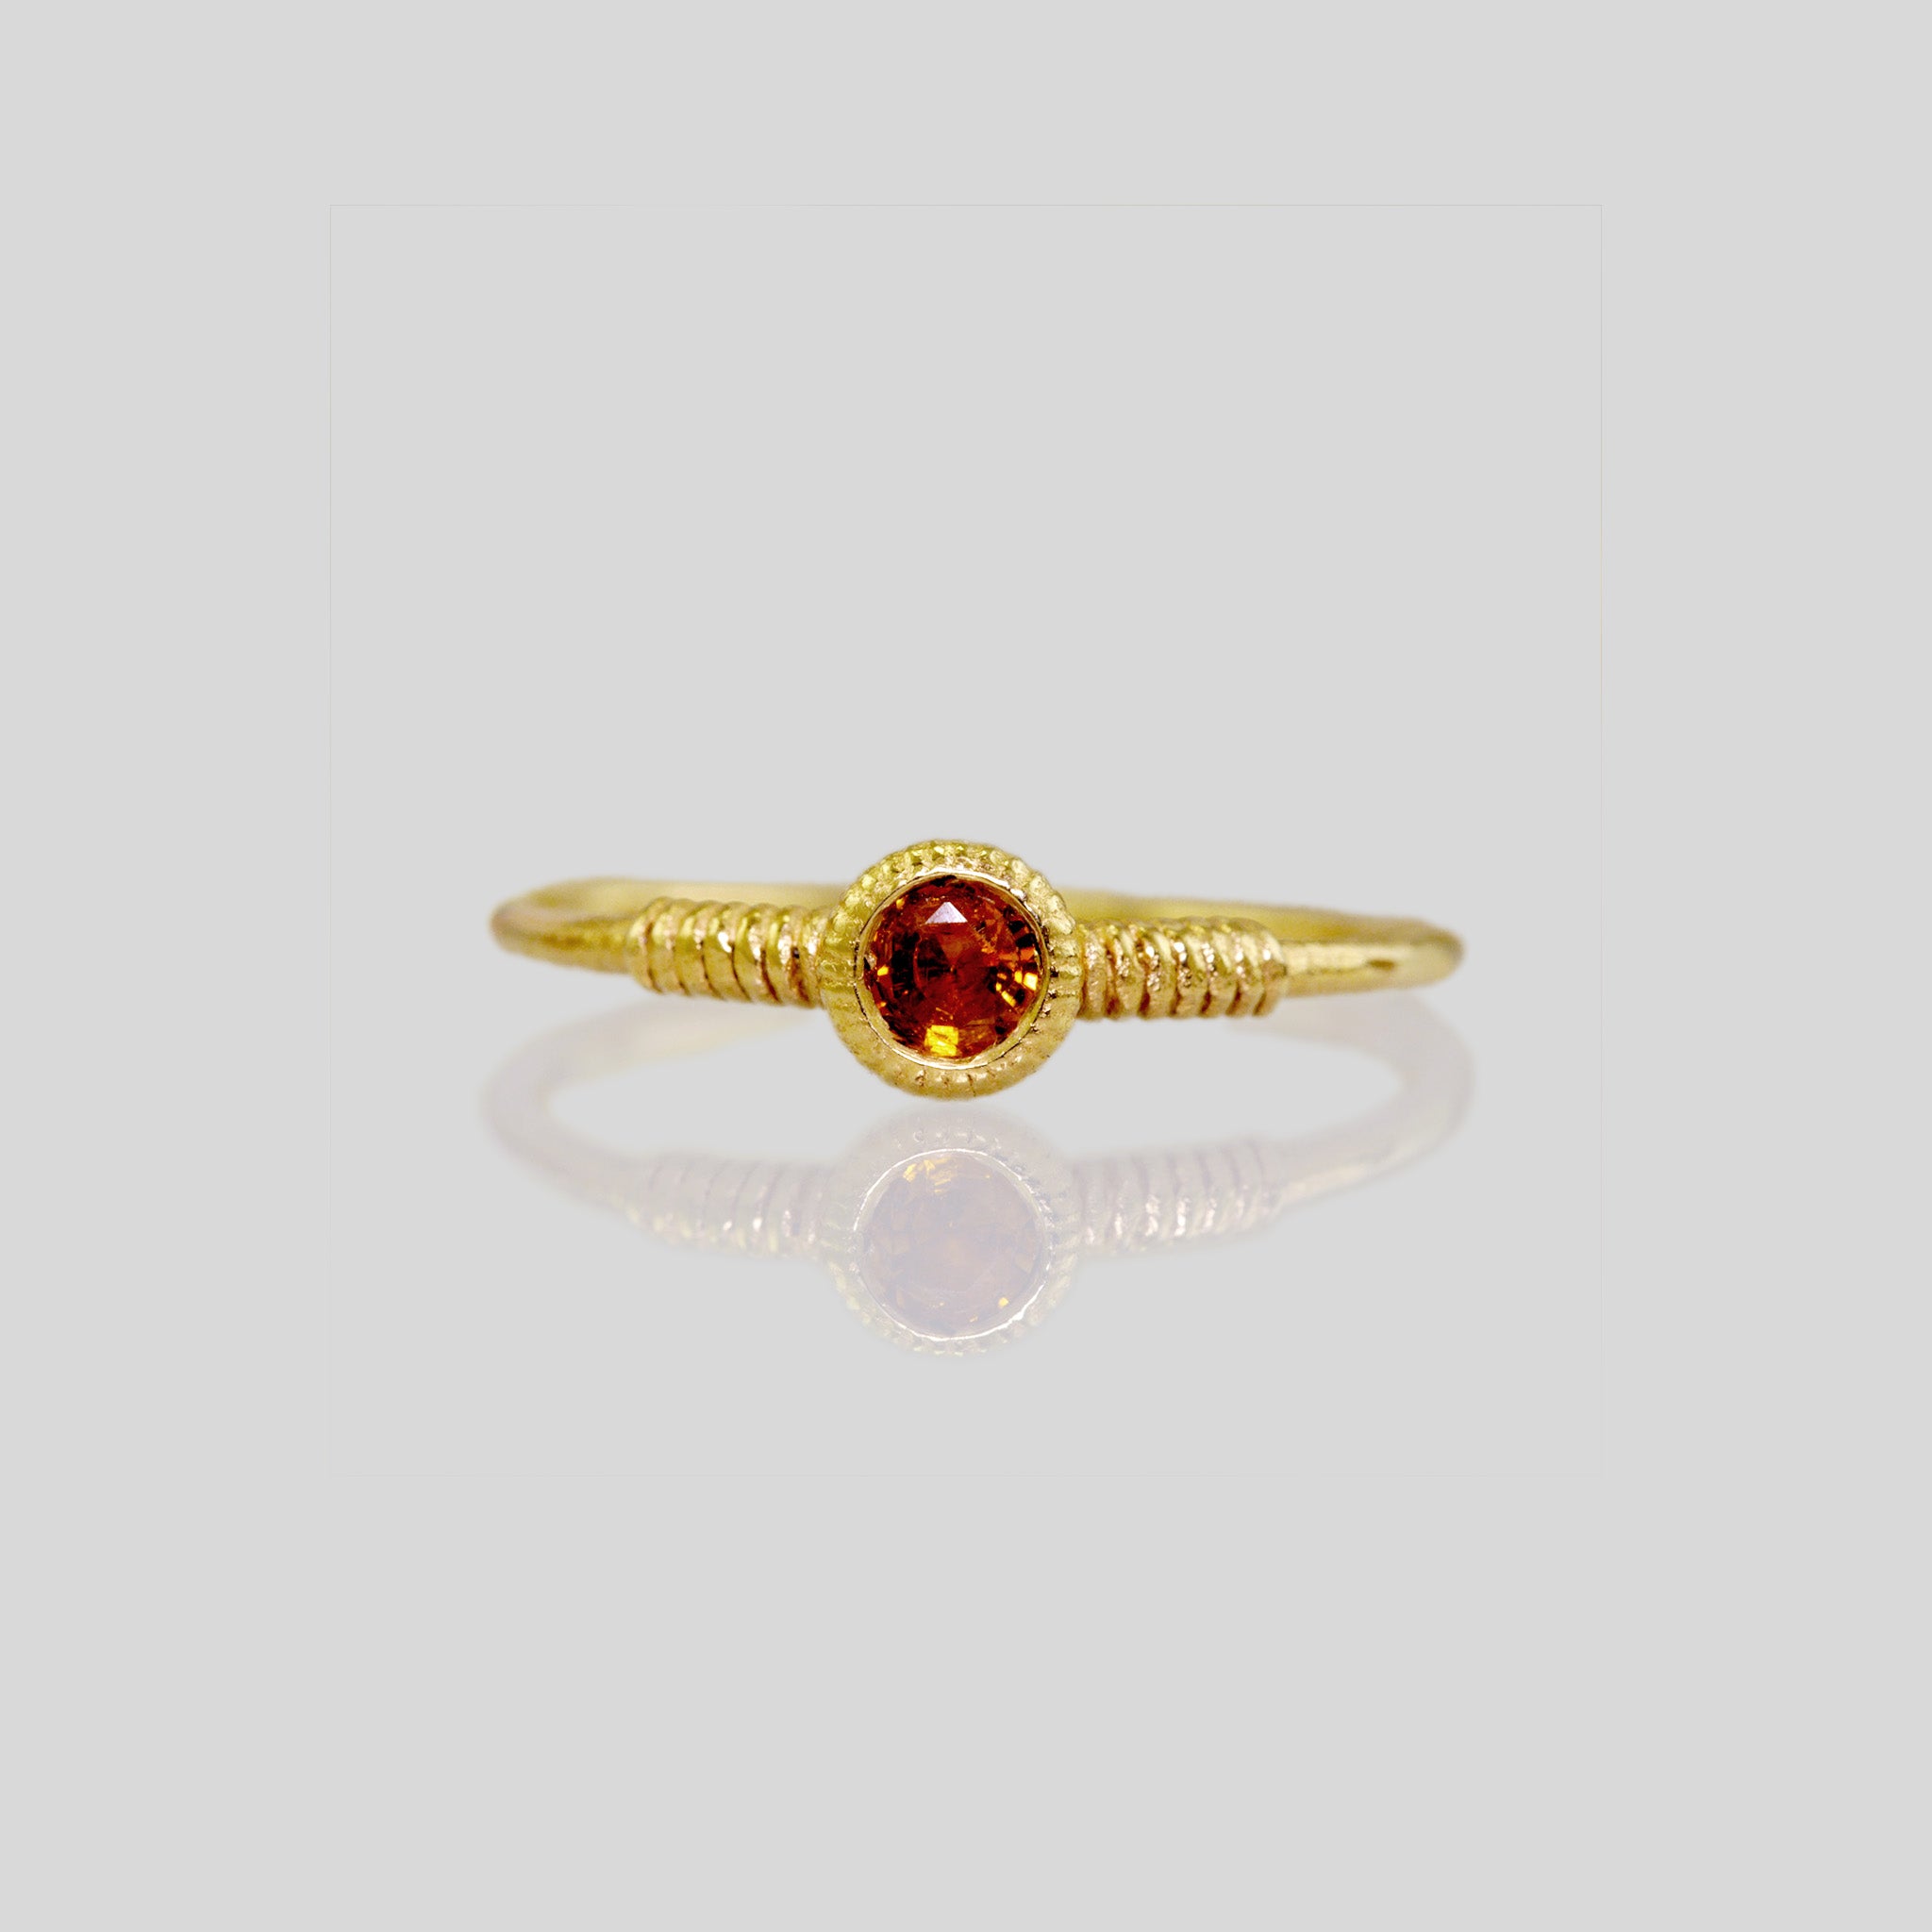 Front view of delicate gold coiled ring adorned with Citrine gemstone, showcasing its elegant coiled design.